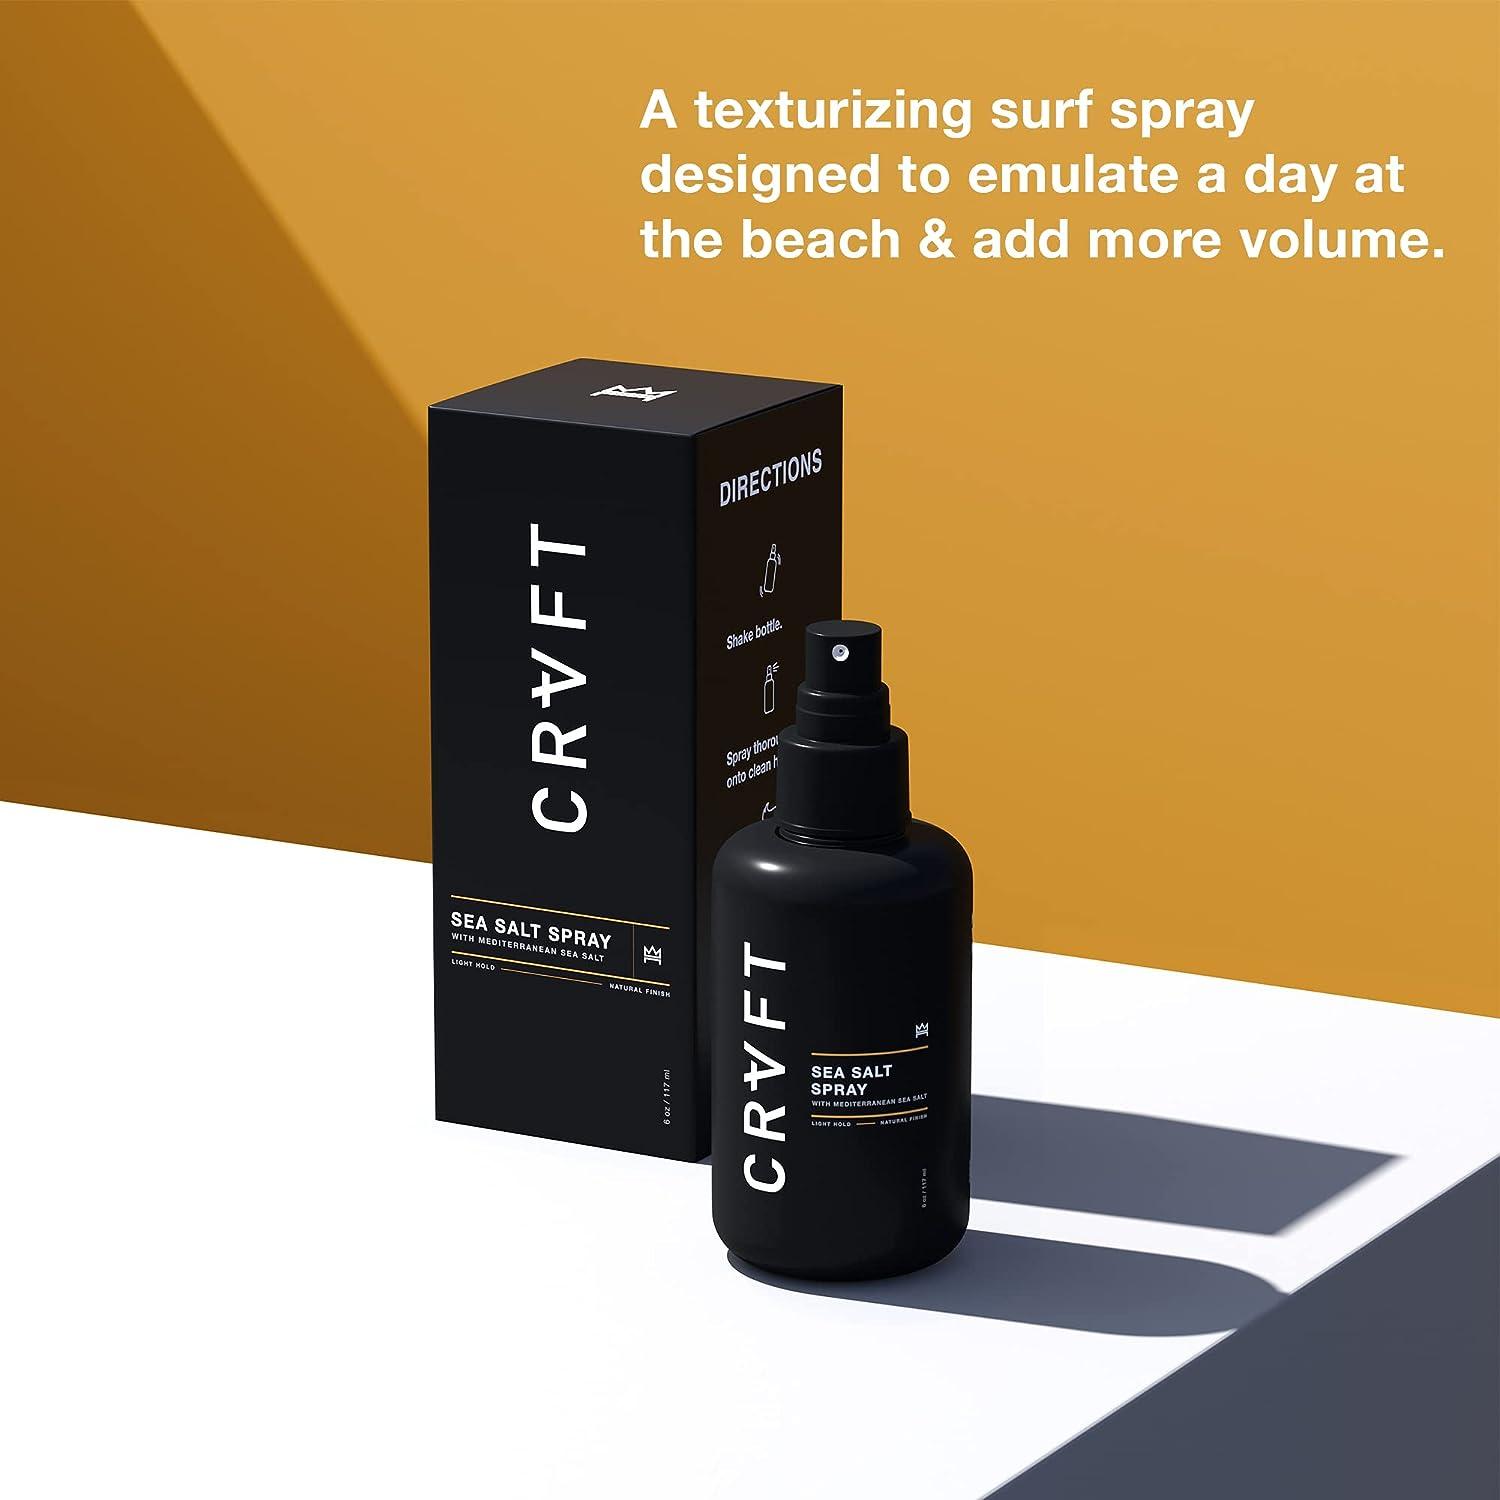 CRVFT Sea Salt Spray 6oz, Light Hold/Natural Finish, Add Volume & Texture, Ideal for All Hair Types & Lengths, Men's Texturizing Surf Spray, Made  in the USA